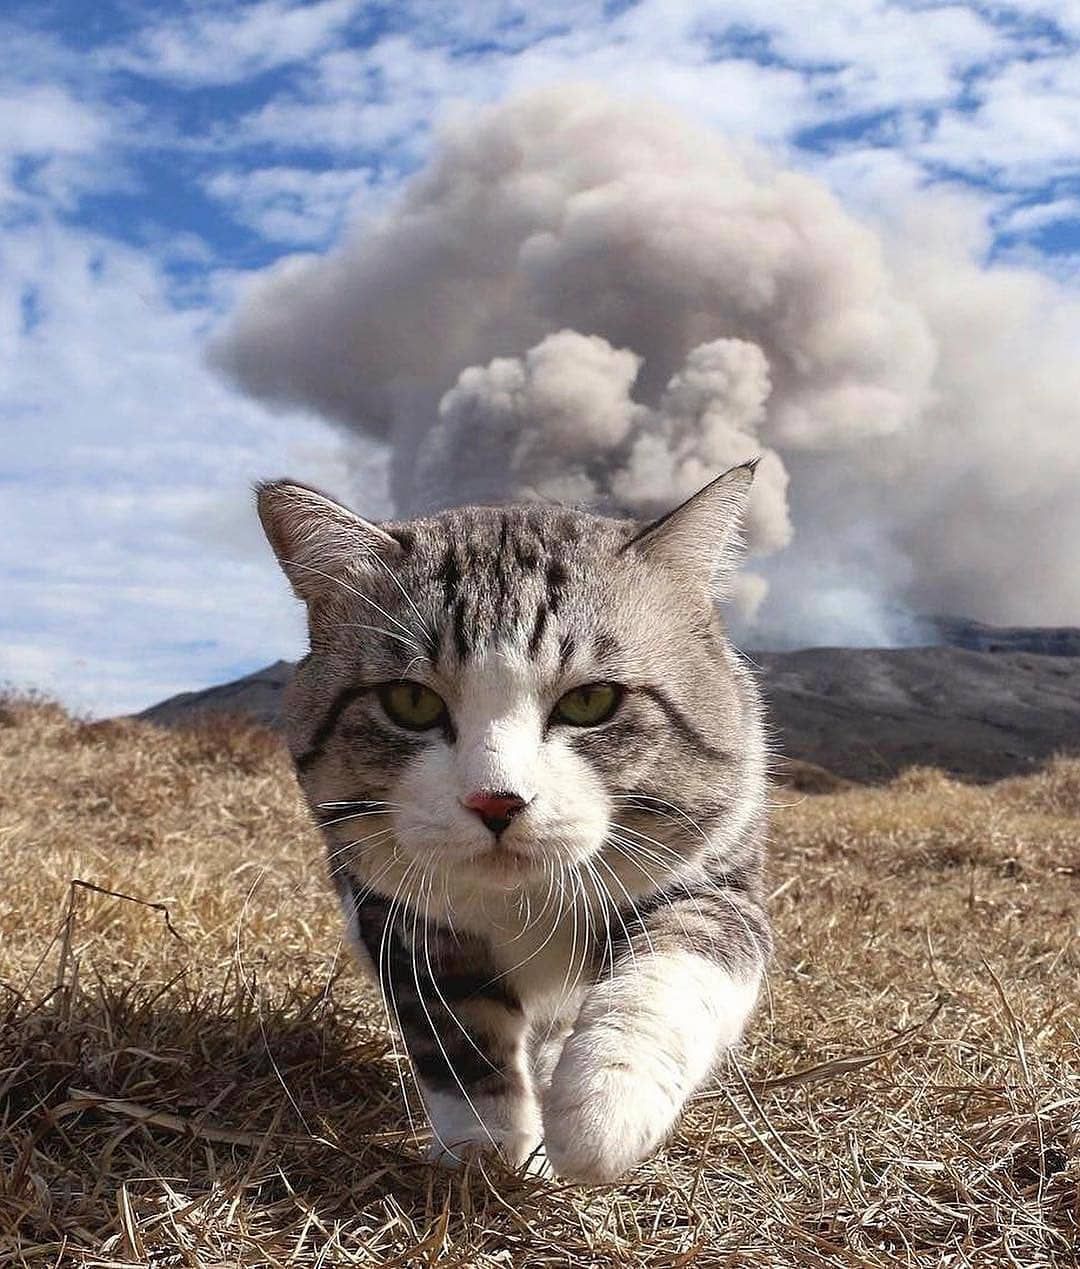 Cat and explosion - Cat walking away from explosion or eruption